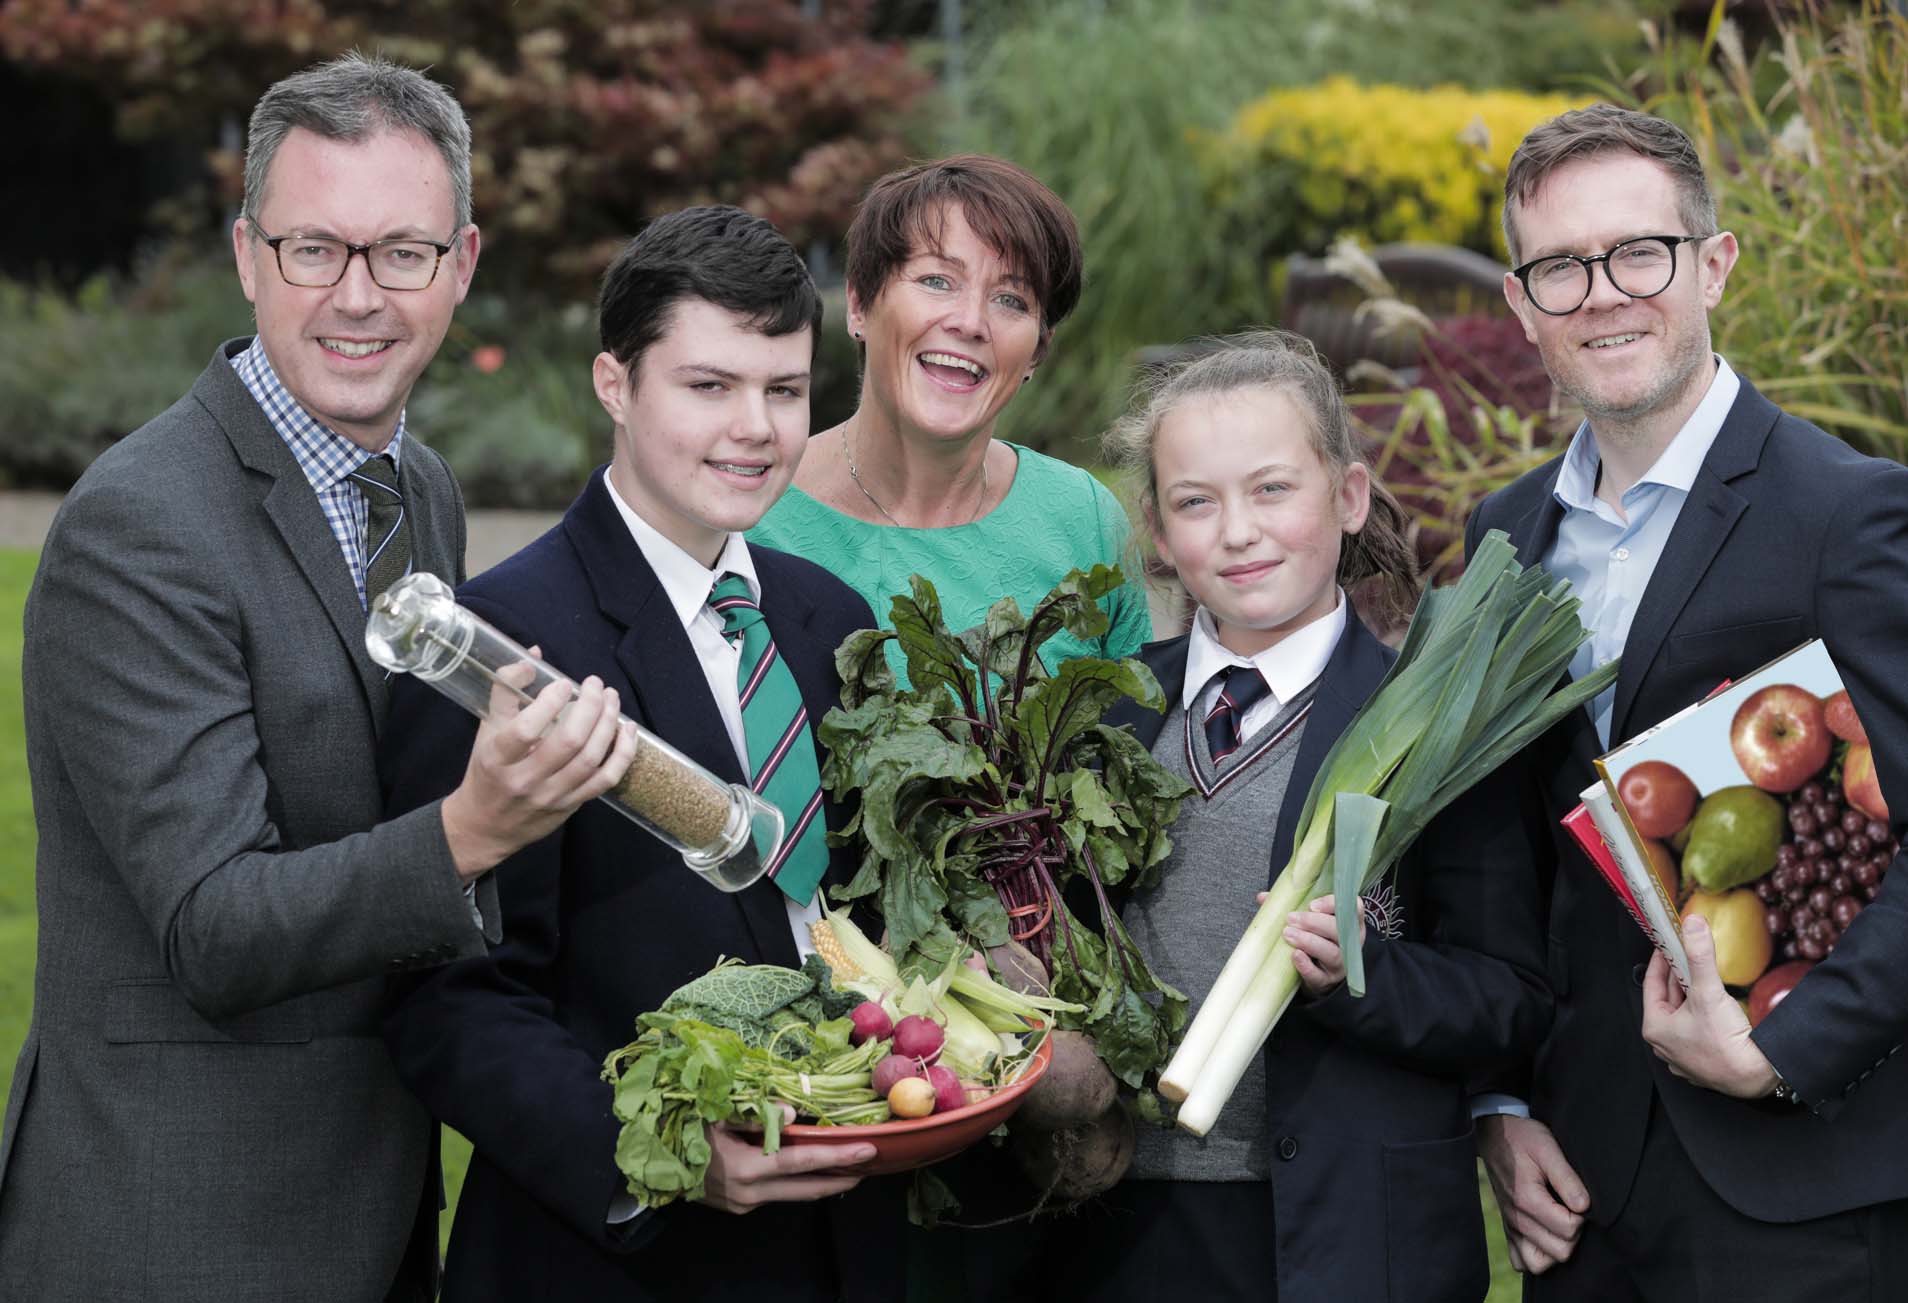 The heat is on to find Ulster’s top young chefs